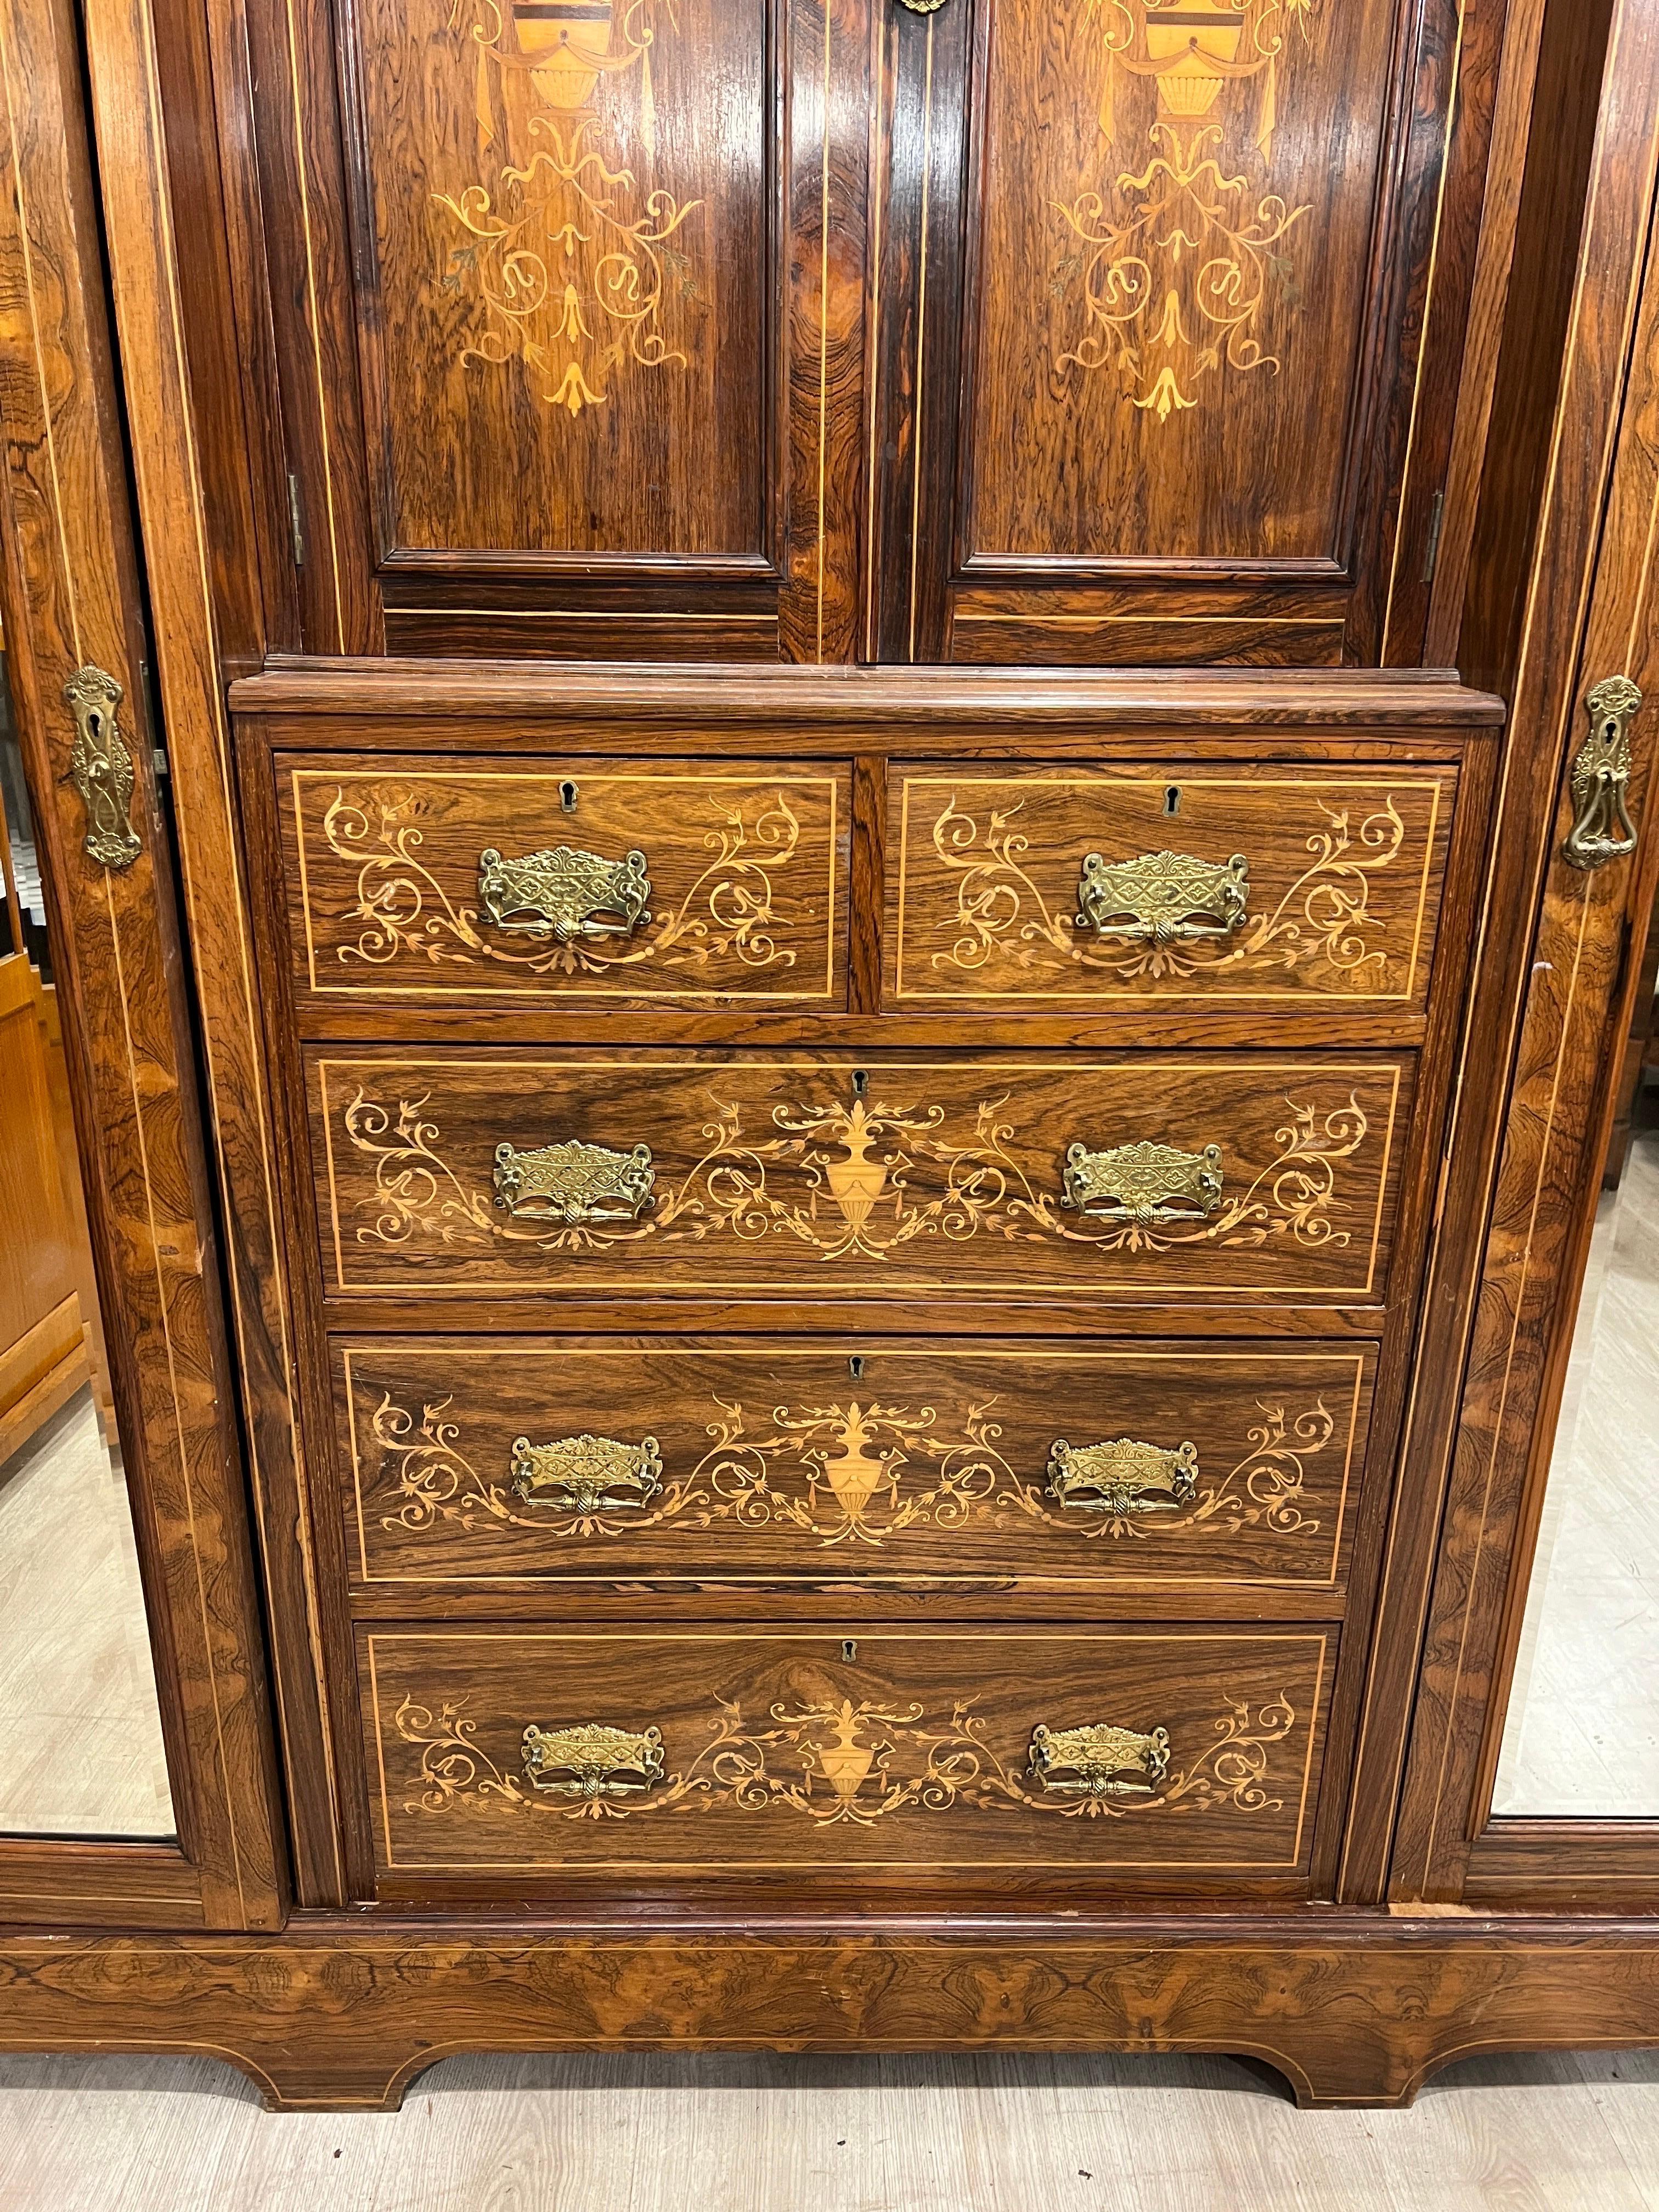 English cabinet made of rosewood and inlaid with boxwood in floral motifs, Victorian era , beautifully crafted and made by the famous Maple&C° cabinet-making firm of London. Counted among the best in woodworking and for creating furniture that will